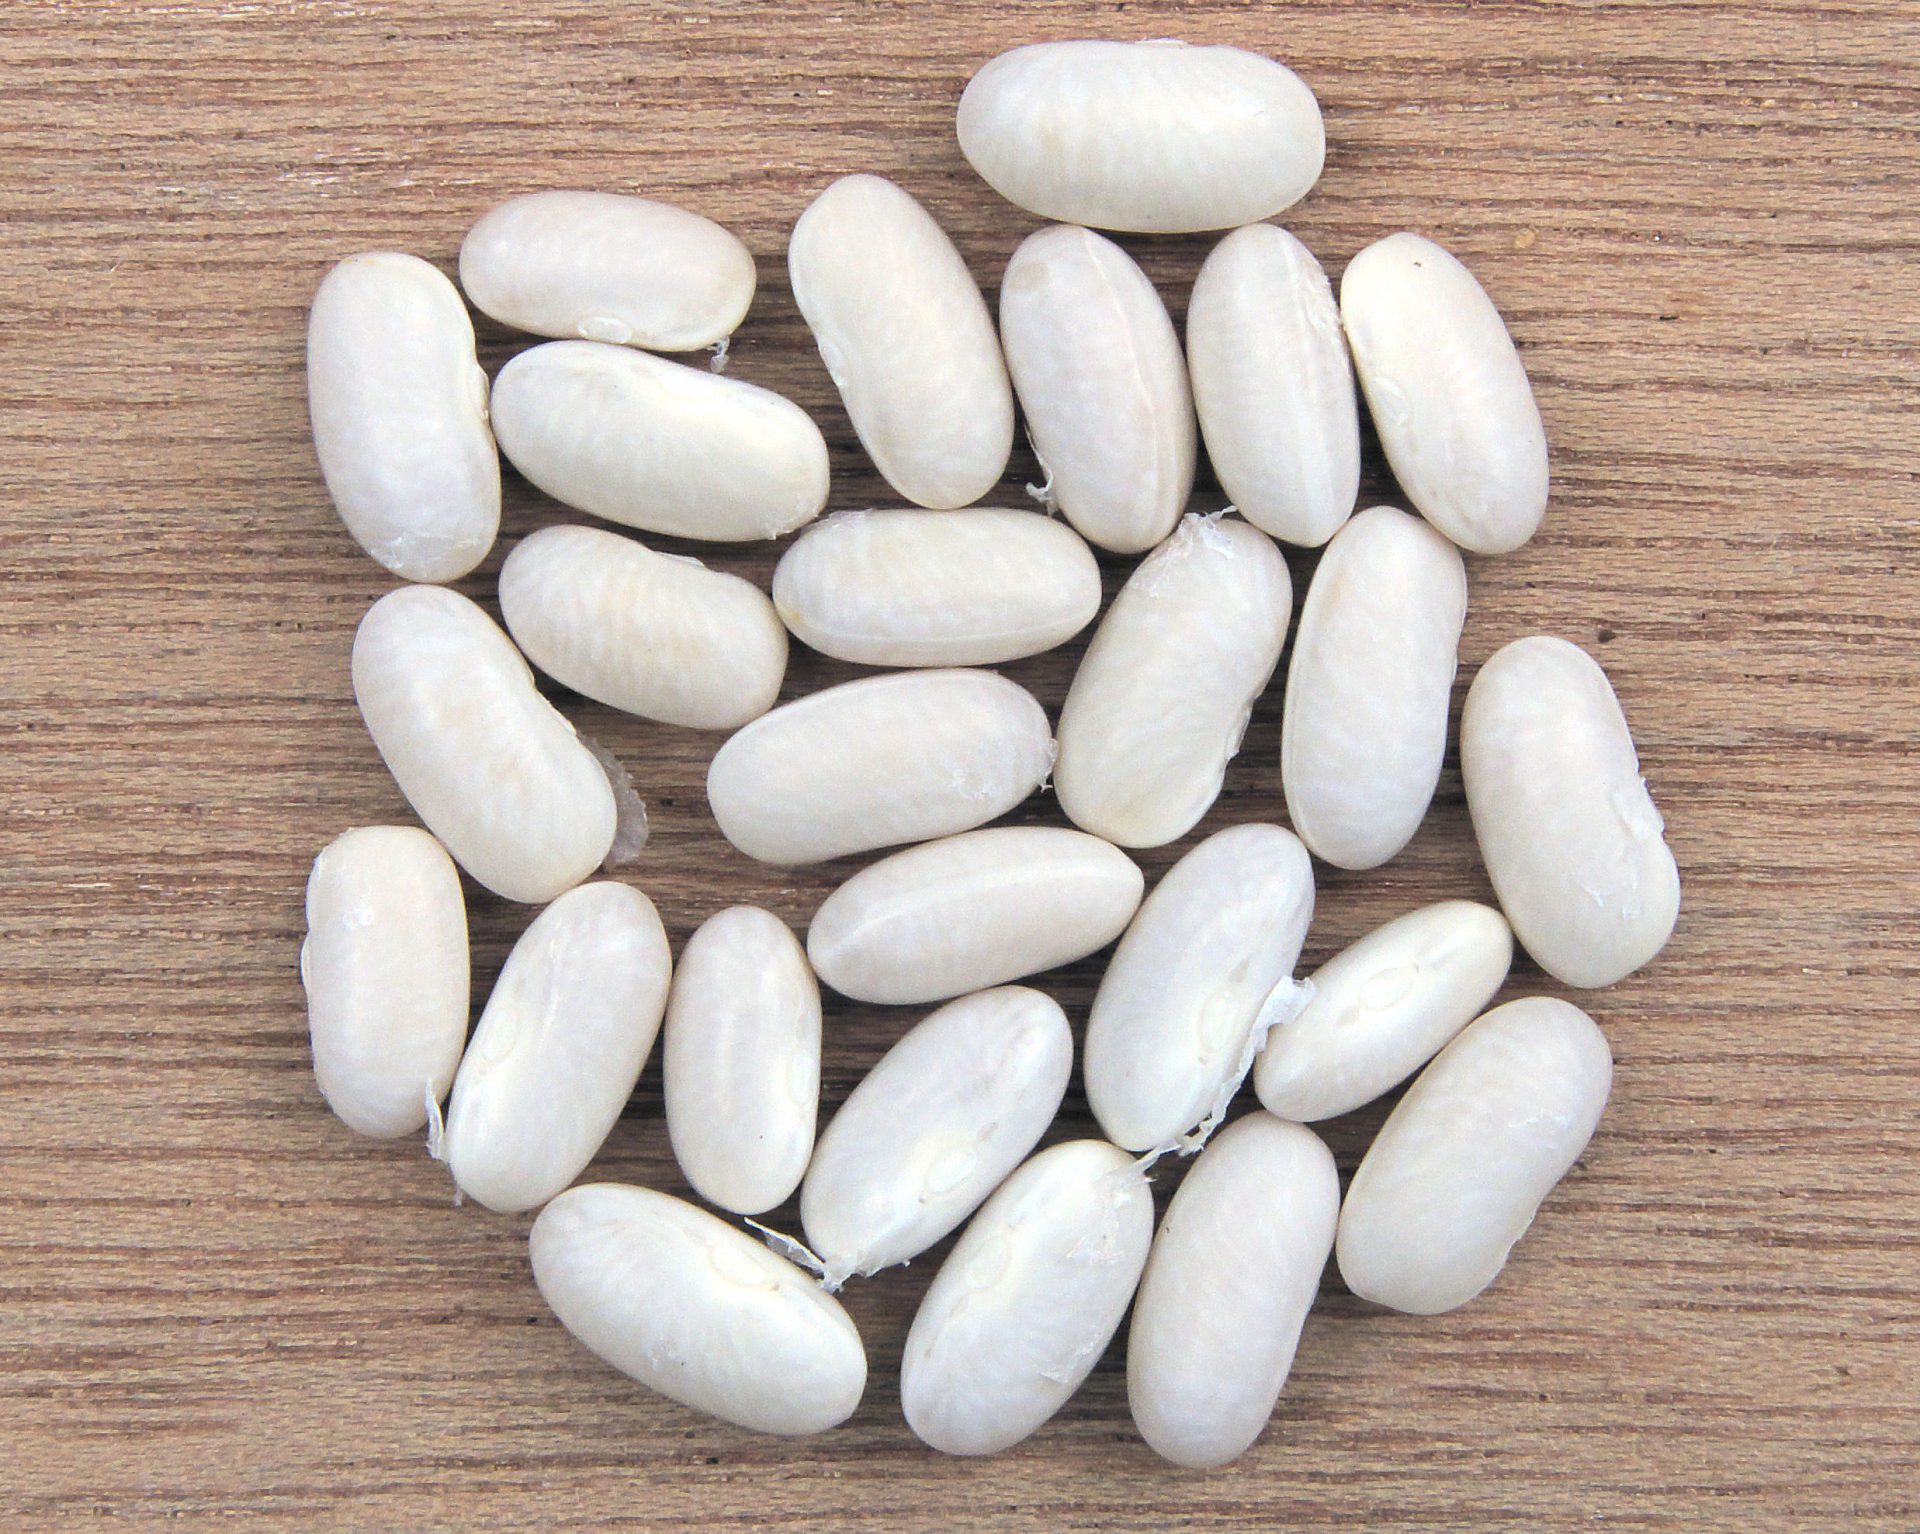 cannellini beans substitute, substitution for cannellini beans, substitute for cannellini beans, cannellini bean substitute, substitute cannellini beans, cannellini beans sub, navy beans